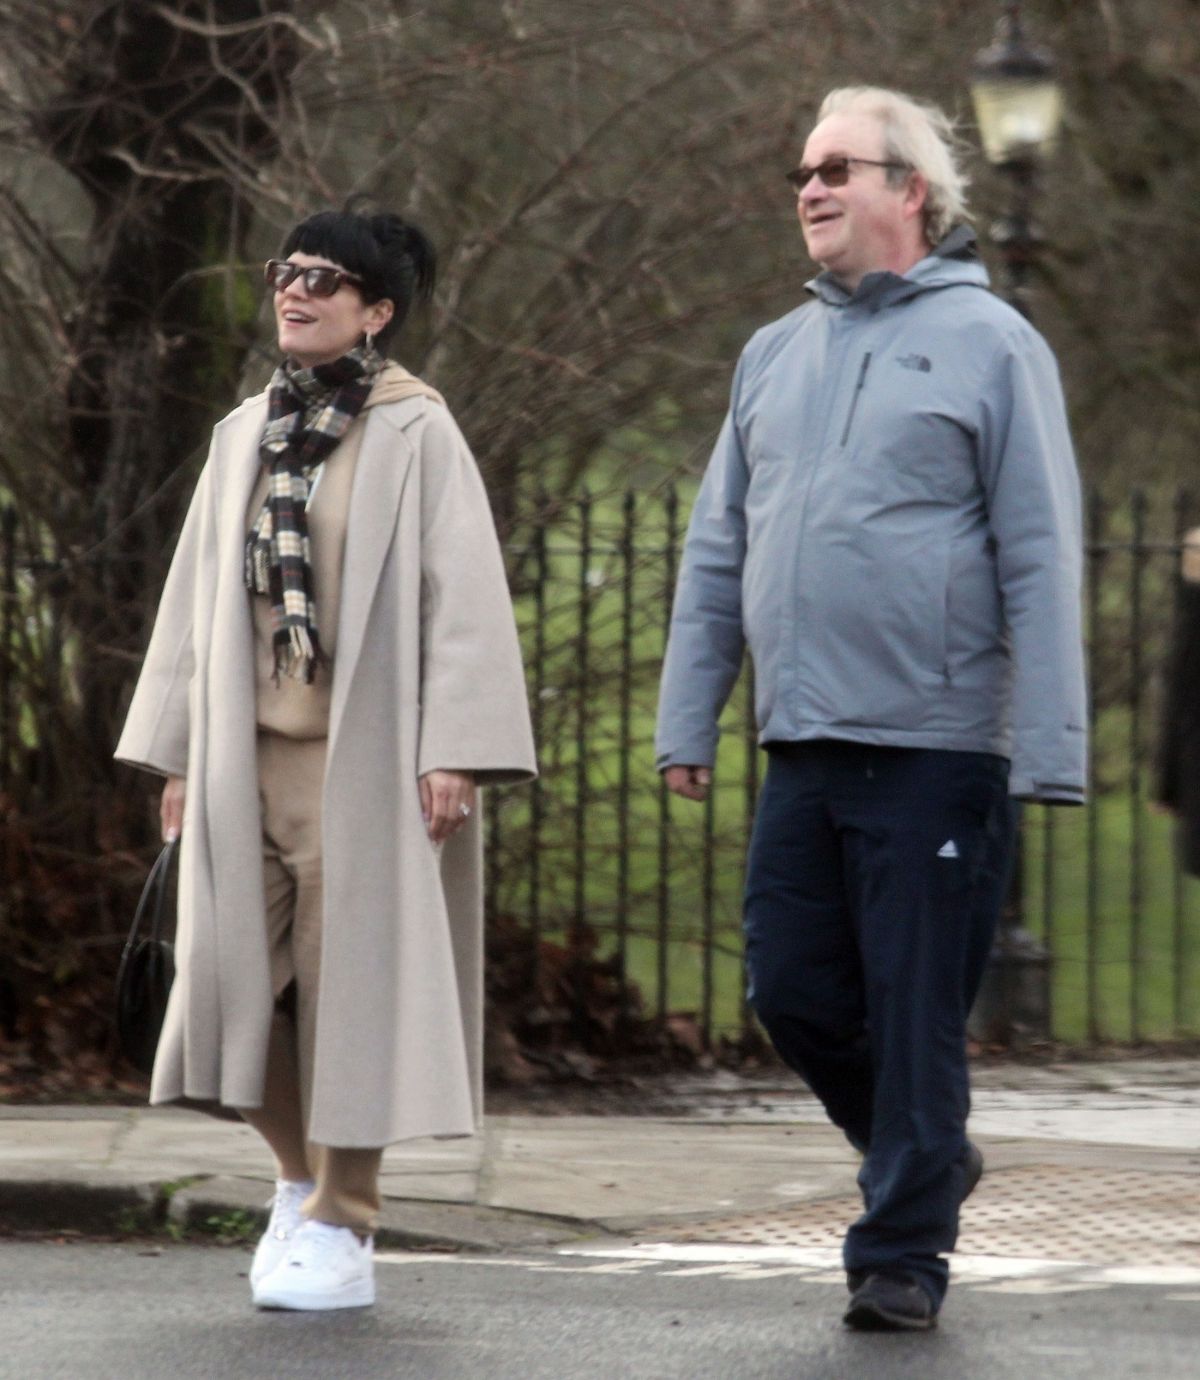 lily-allen-out-and-about-in-hampstead-02-02-2021-0.jpg